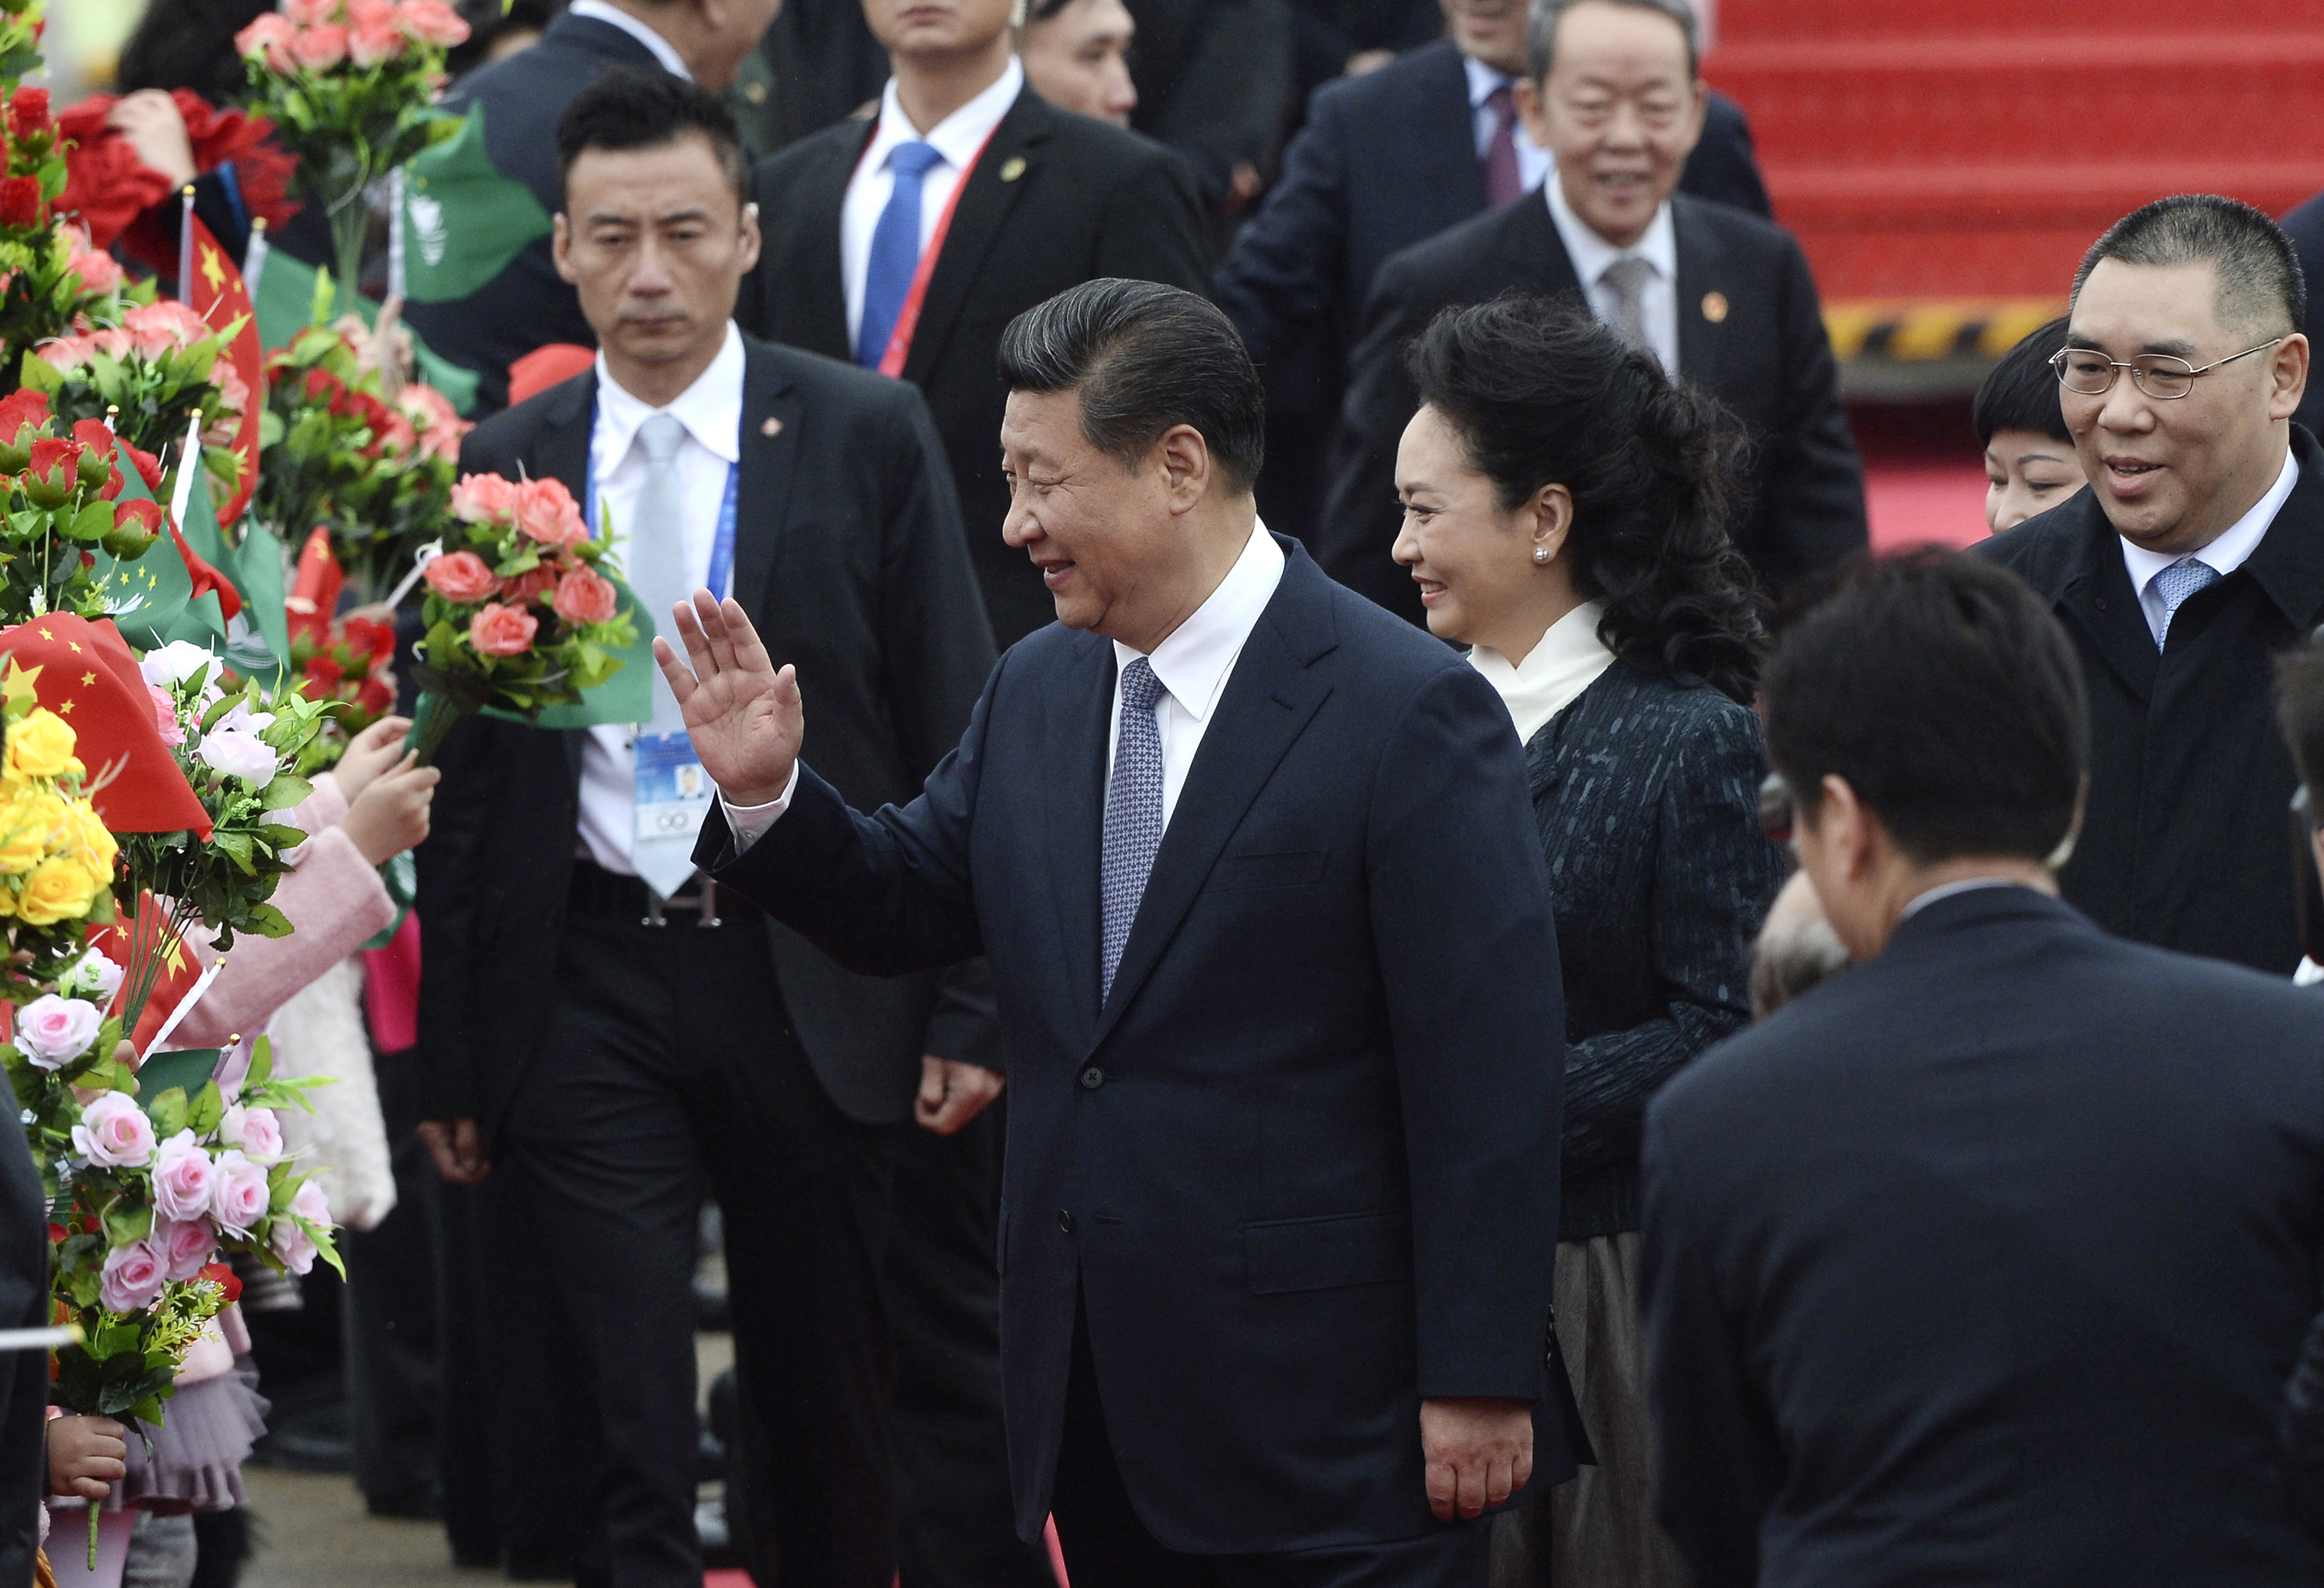 In this photo provided by China's Xinhua News Agency, Chinese President Xi Jinping, center, and his wife Peng Liyuan, center right,  wave as they arrive at the international airport in Macau on Dec. 19, 2014 (Cheong Kam Ka—AP)